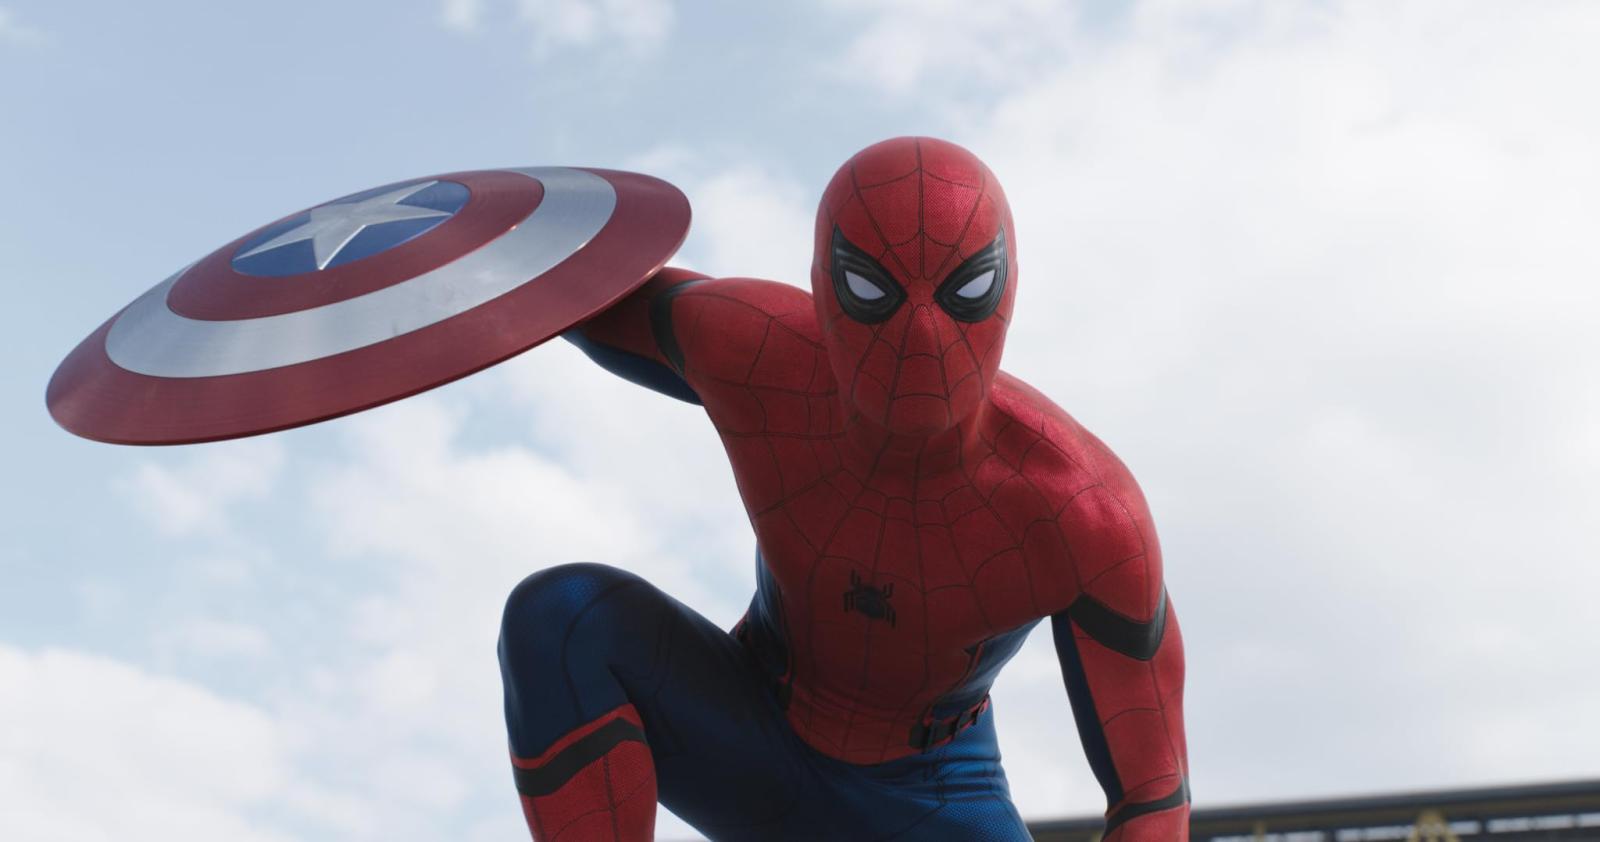 All 8 Spider-Man Suits in MCU, Ranked by How Cool They Look - image 2